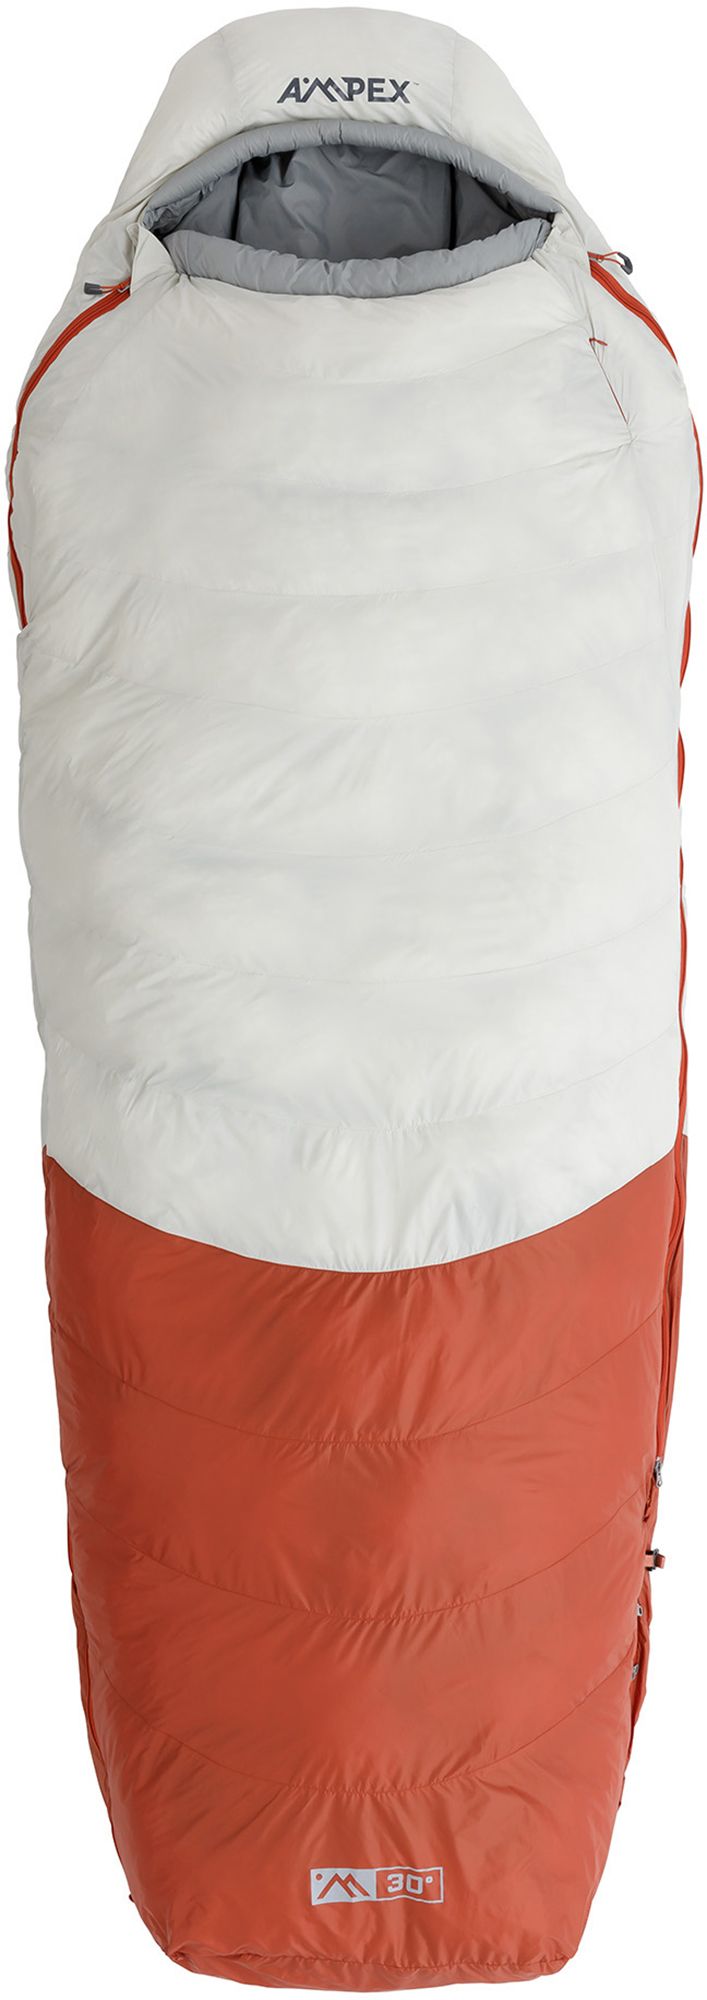 Photos - Suitcase / Backpack Cover AMPEX Hybrid Sleeping Bag 30- Long Wide, Men's, White/Red/Grey | Father's